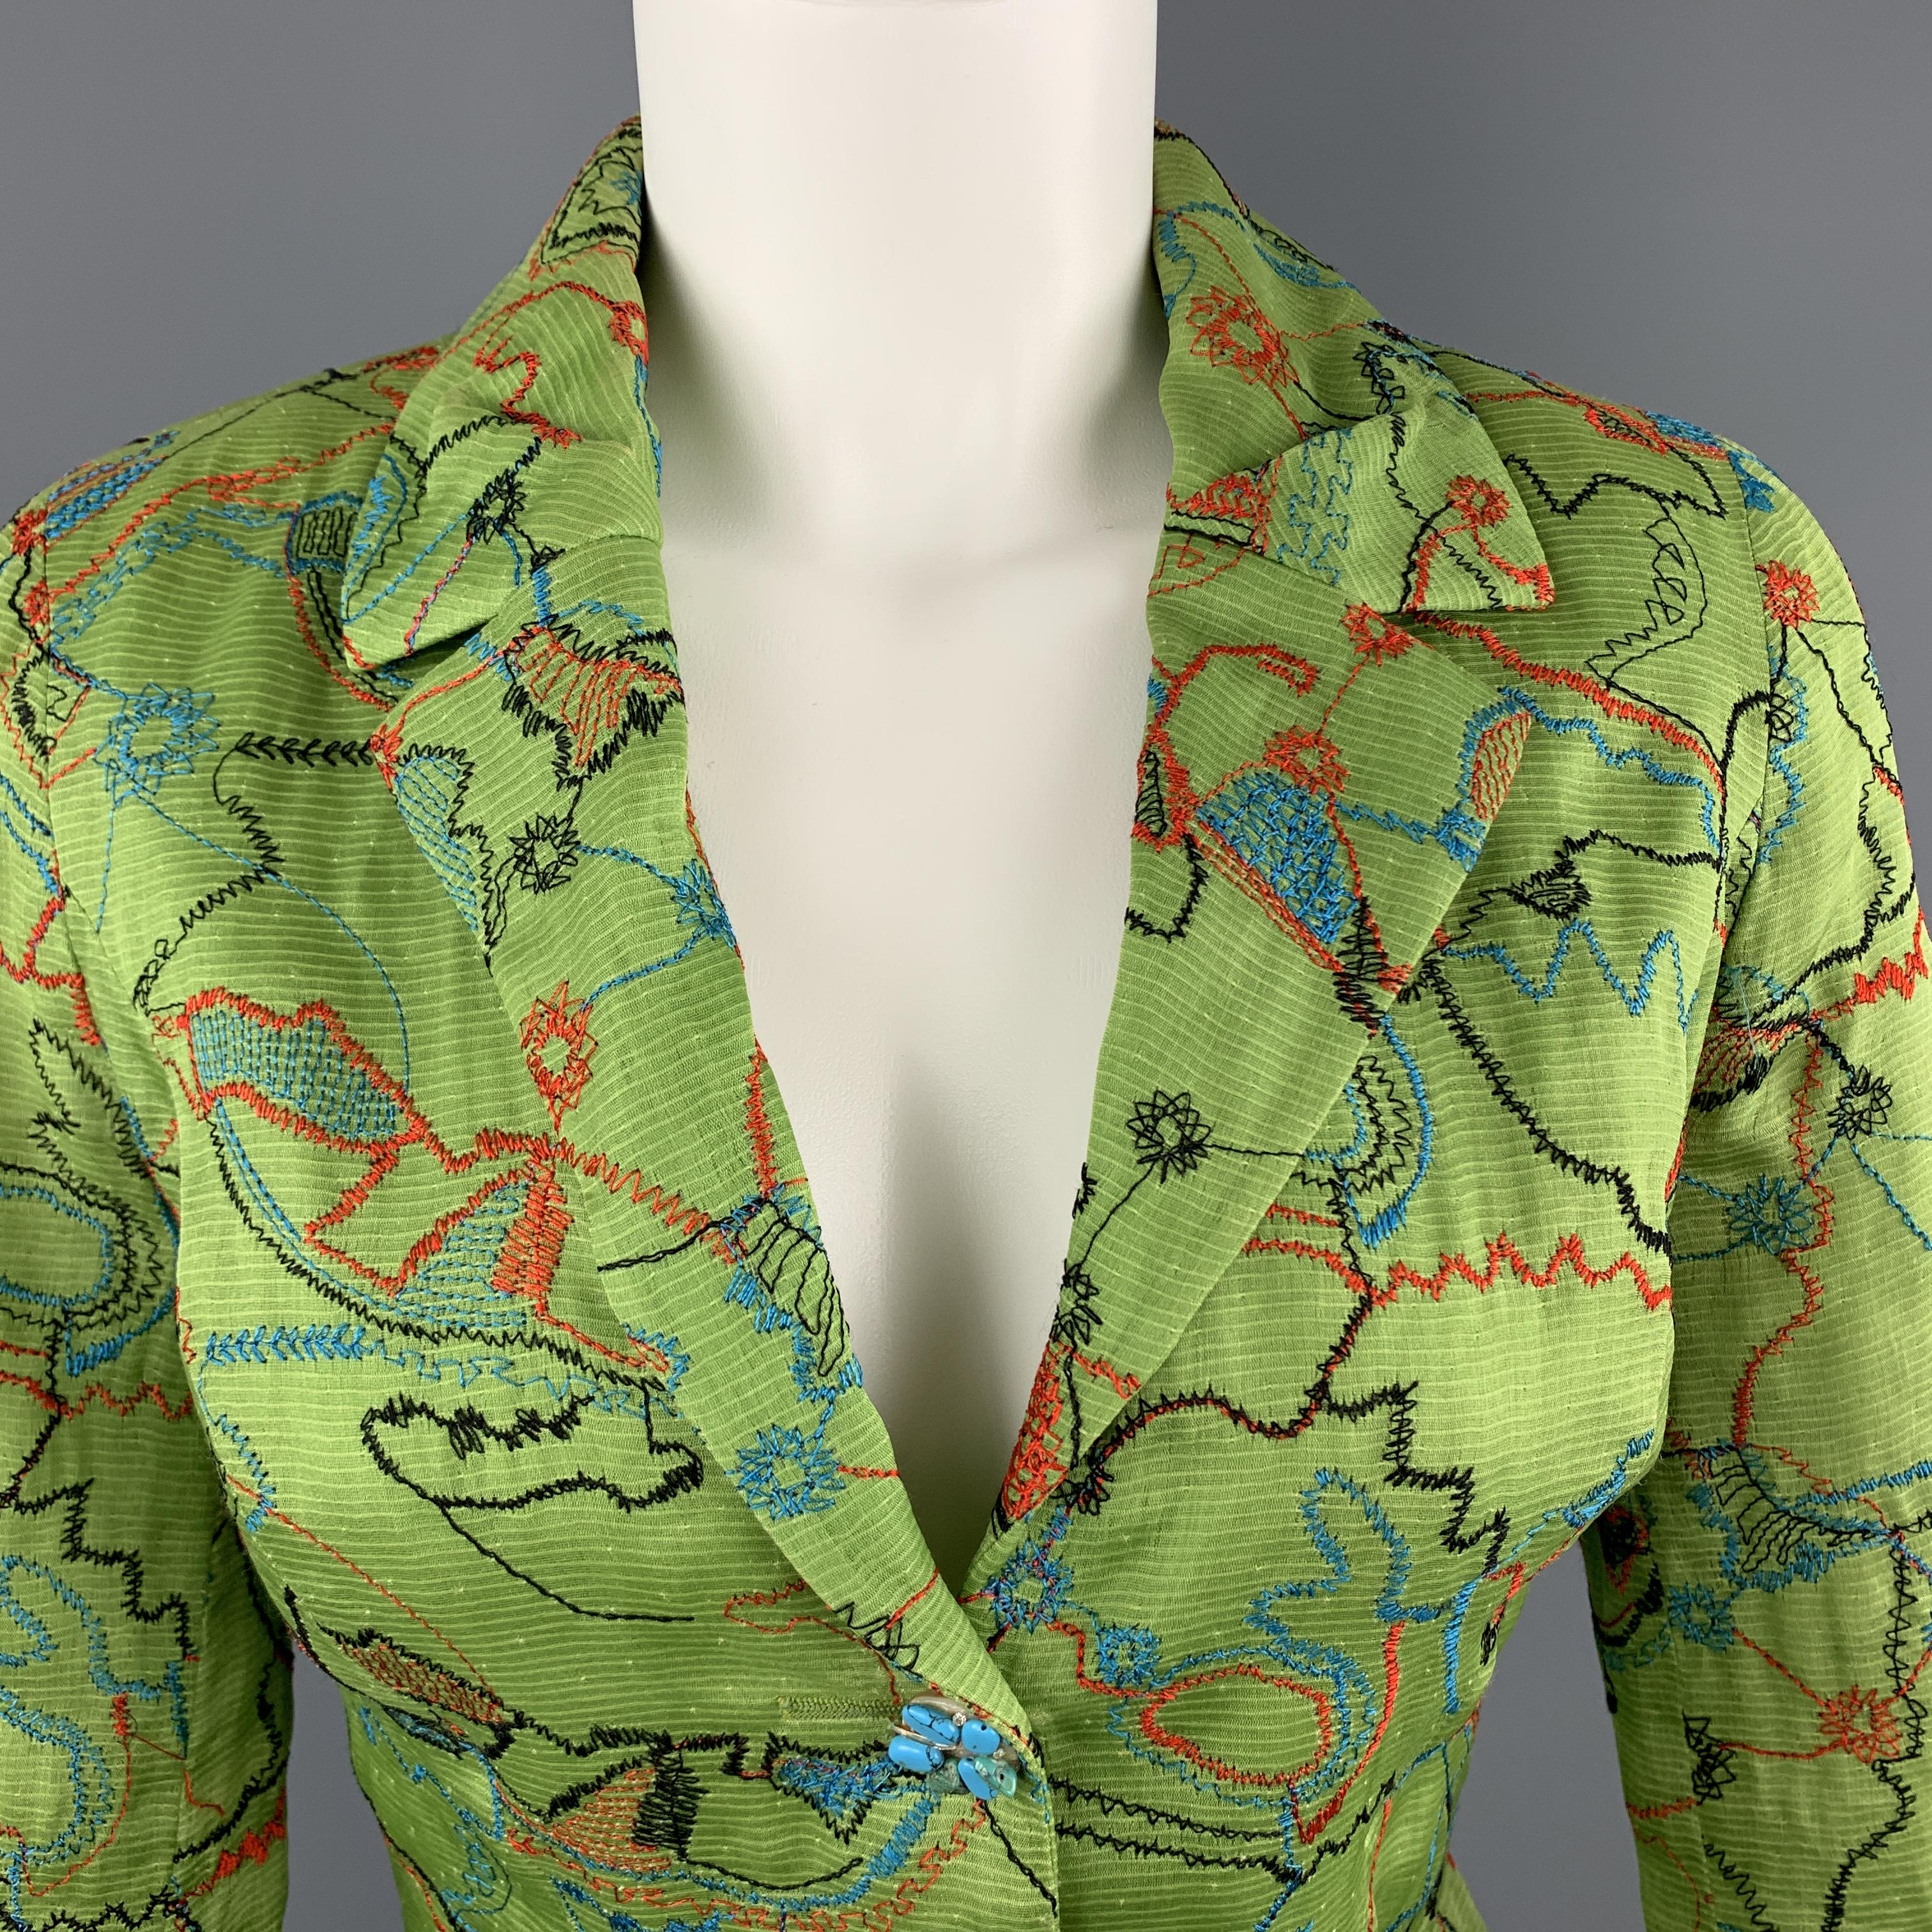 Vintage CHRISTIAN LACROIX blazer comes in muted lime green silk blend fabric with blue and red embroidery pattern throughout, tailored waist, pleated lapel, and single breasted button front with faux turquoise and rhinestone embellished buttons.